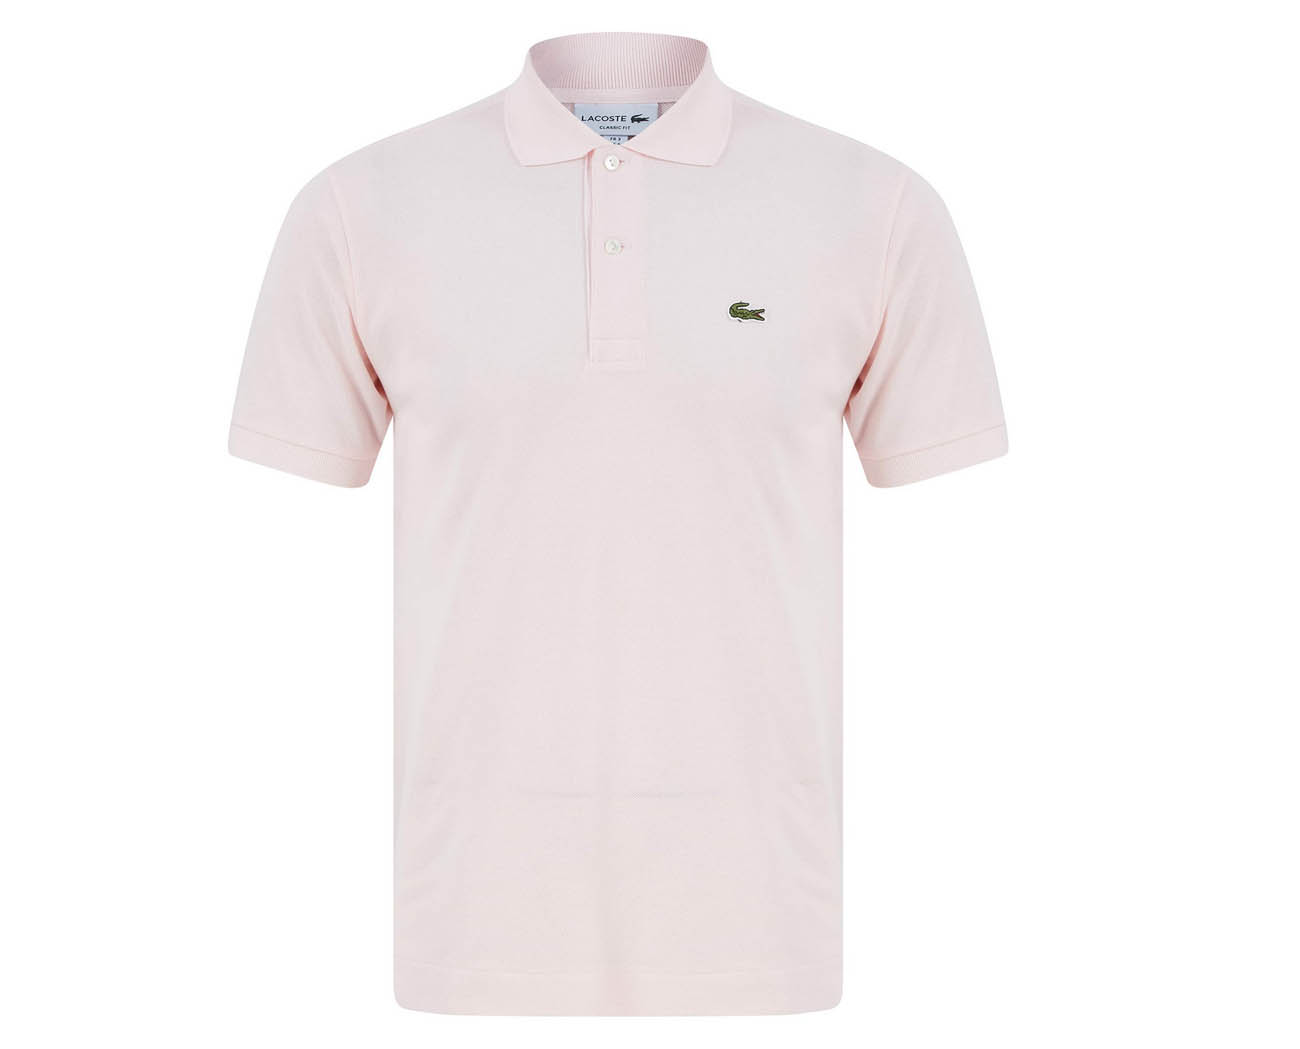 Lacoste Men's Polo Shirt Classic Style Logo Branded Cotton Polo Rose Pink | eBay